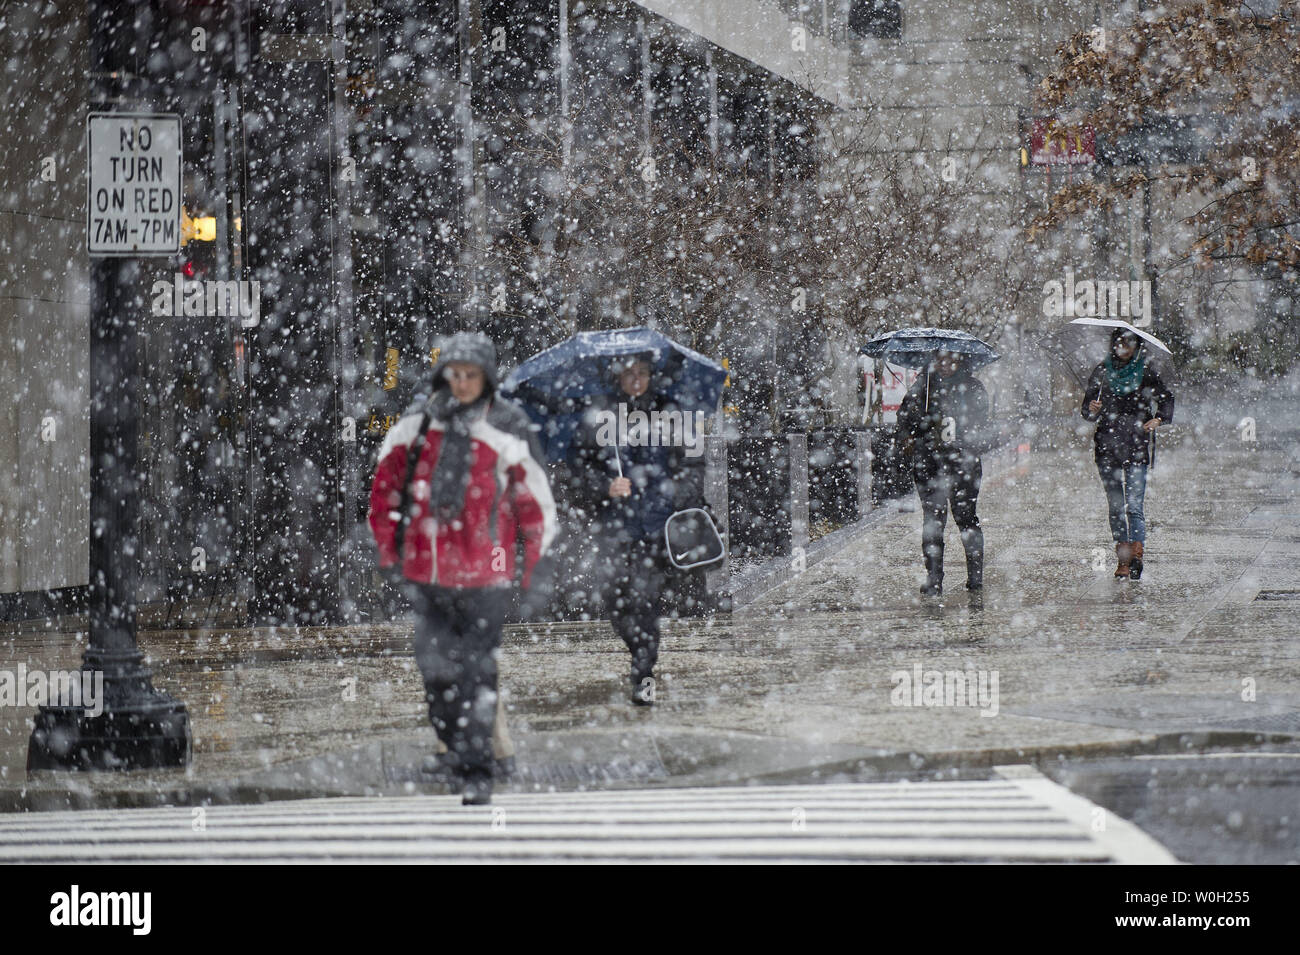 Pedestrians cross Pennsylvania Ave. as snow and rain begin to fall on March 6, 2013 in Washington, D.C. Meteorologist are predicting anywhere from five to ten inches of snow to fall inside the Capital Beltway, and significantly more further north and west.  UPI/Kevin Dietsch Stock Photo